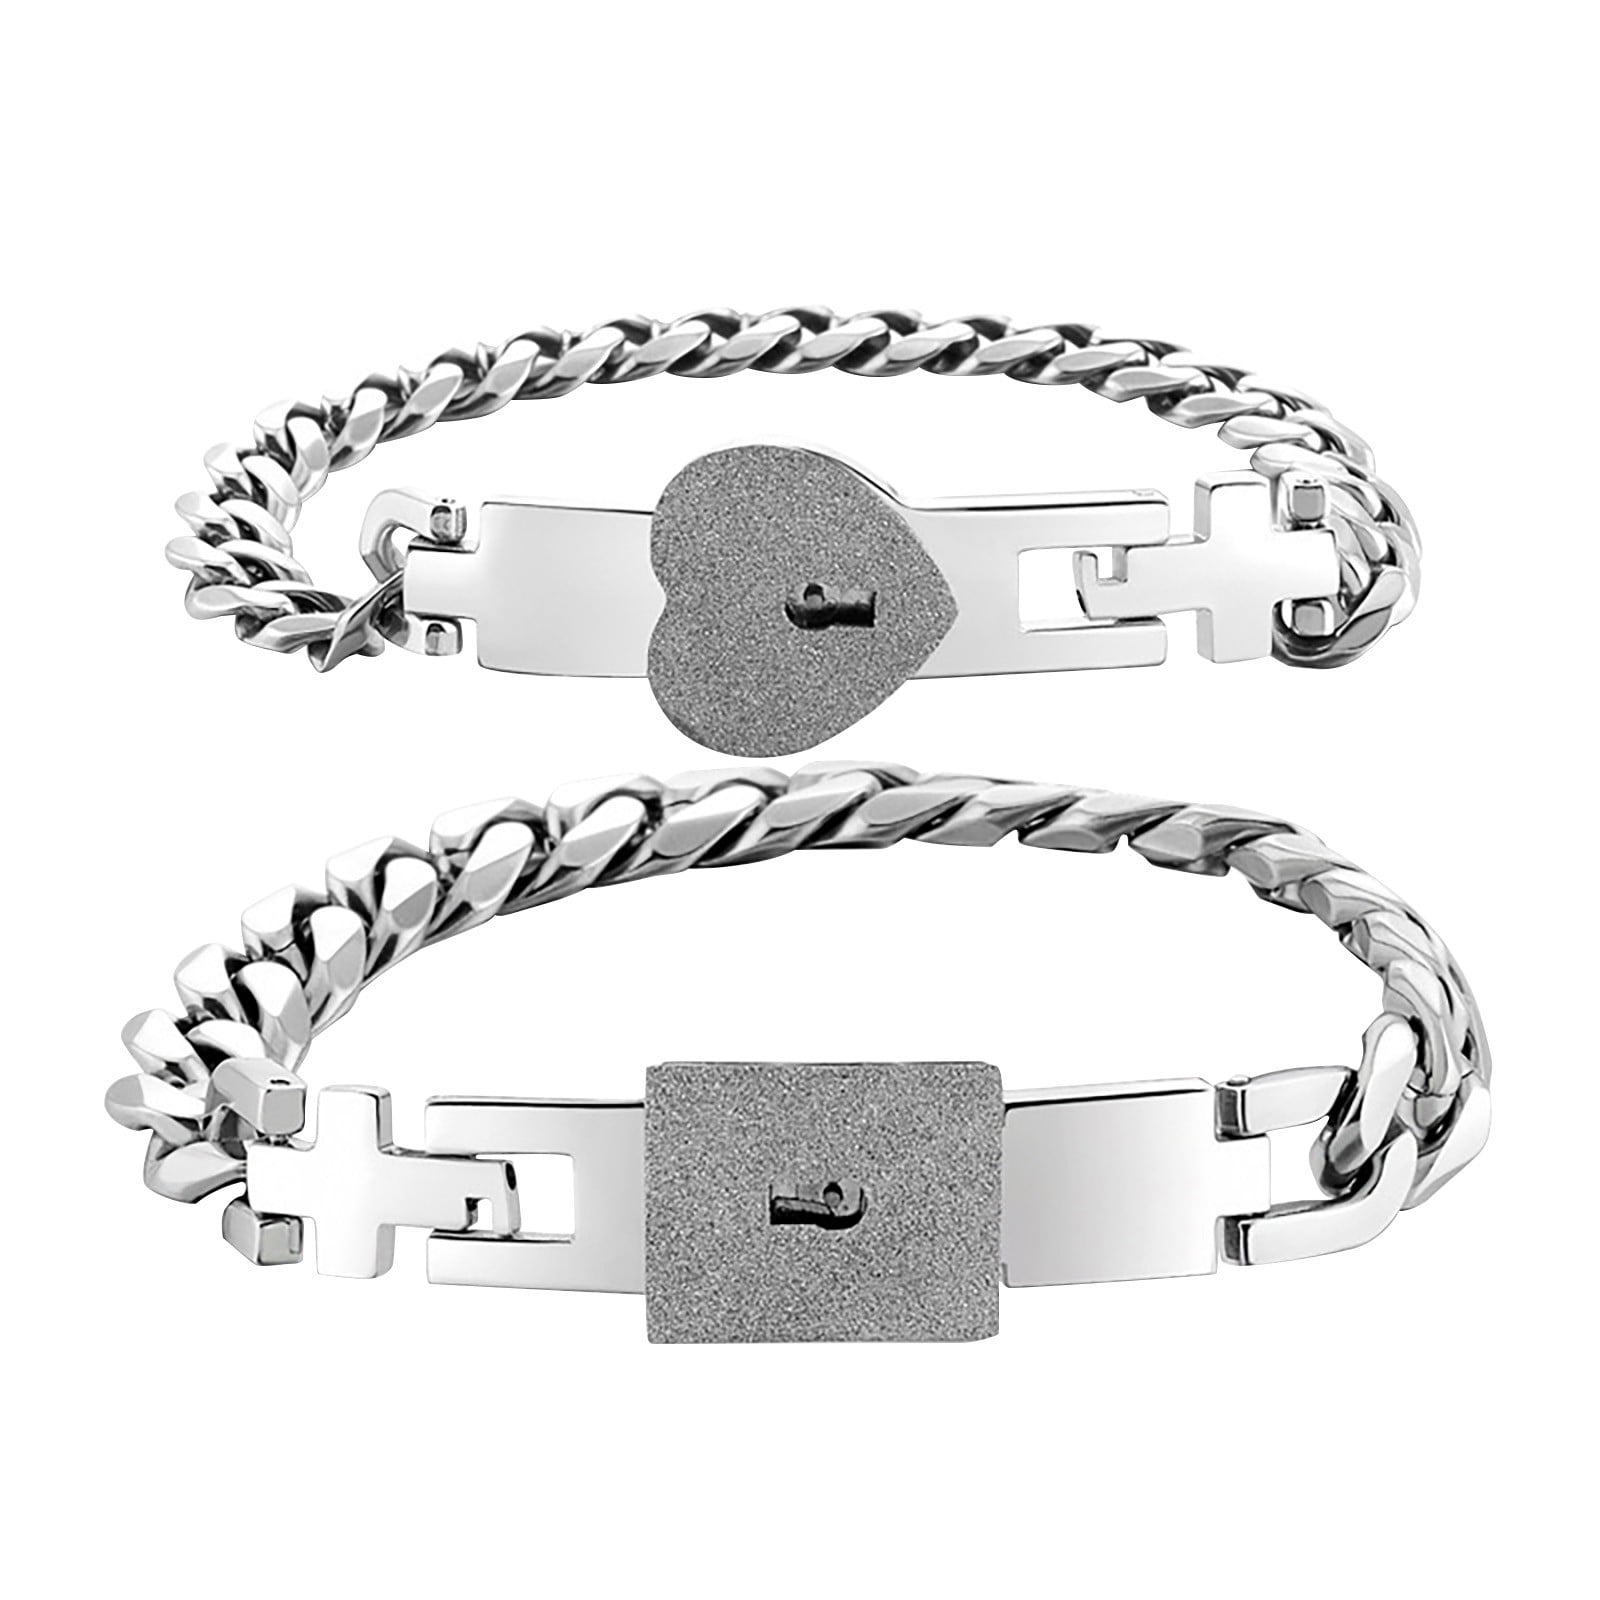 Innovato Design Love Lock and Key Stainless Steel Necklace & Bracelet Couple Jewelry Set